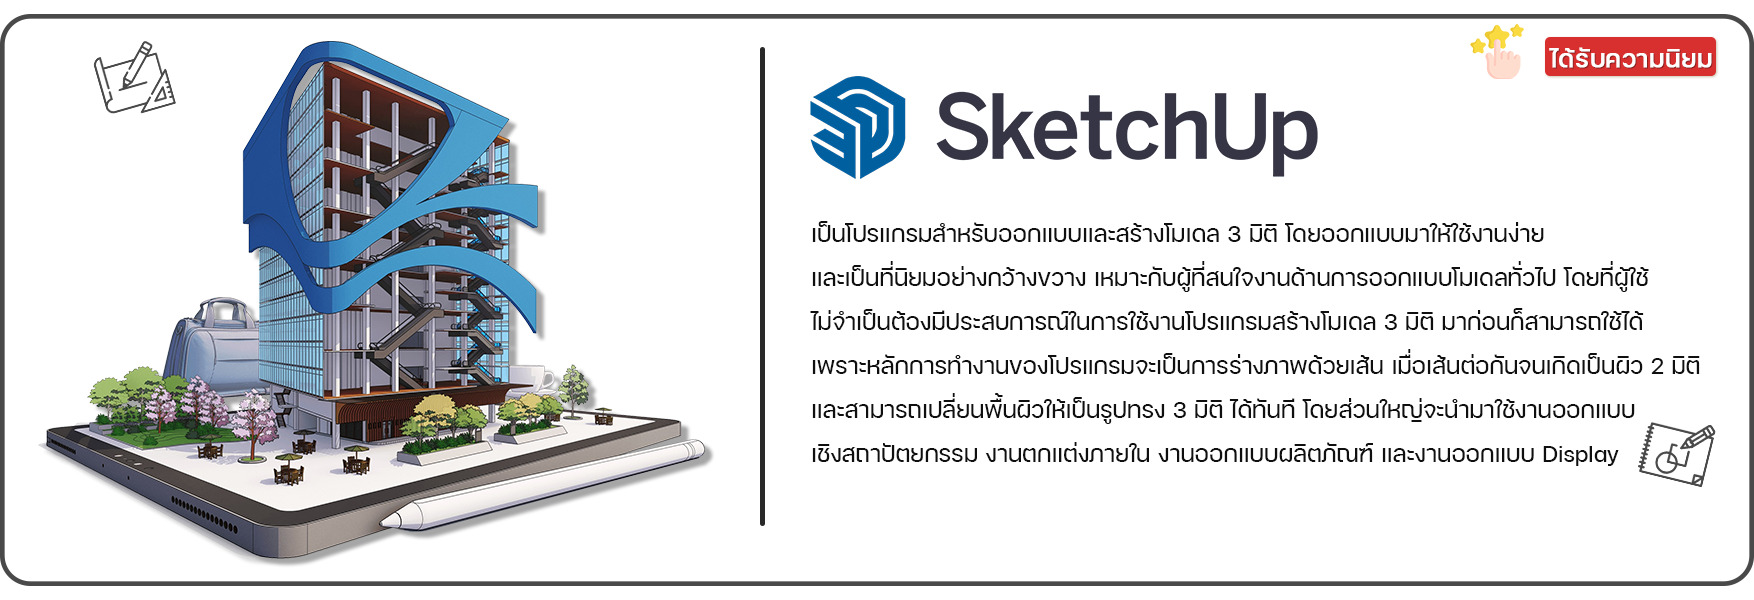 Sketchup Pro Promotion